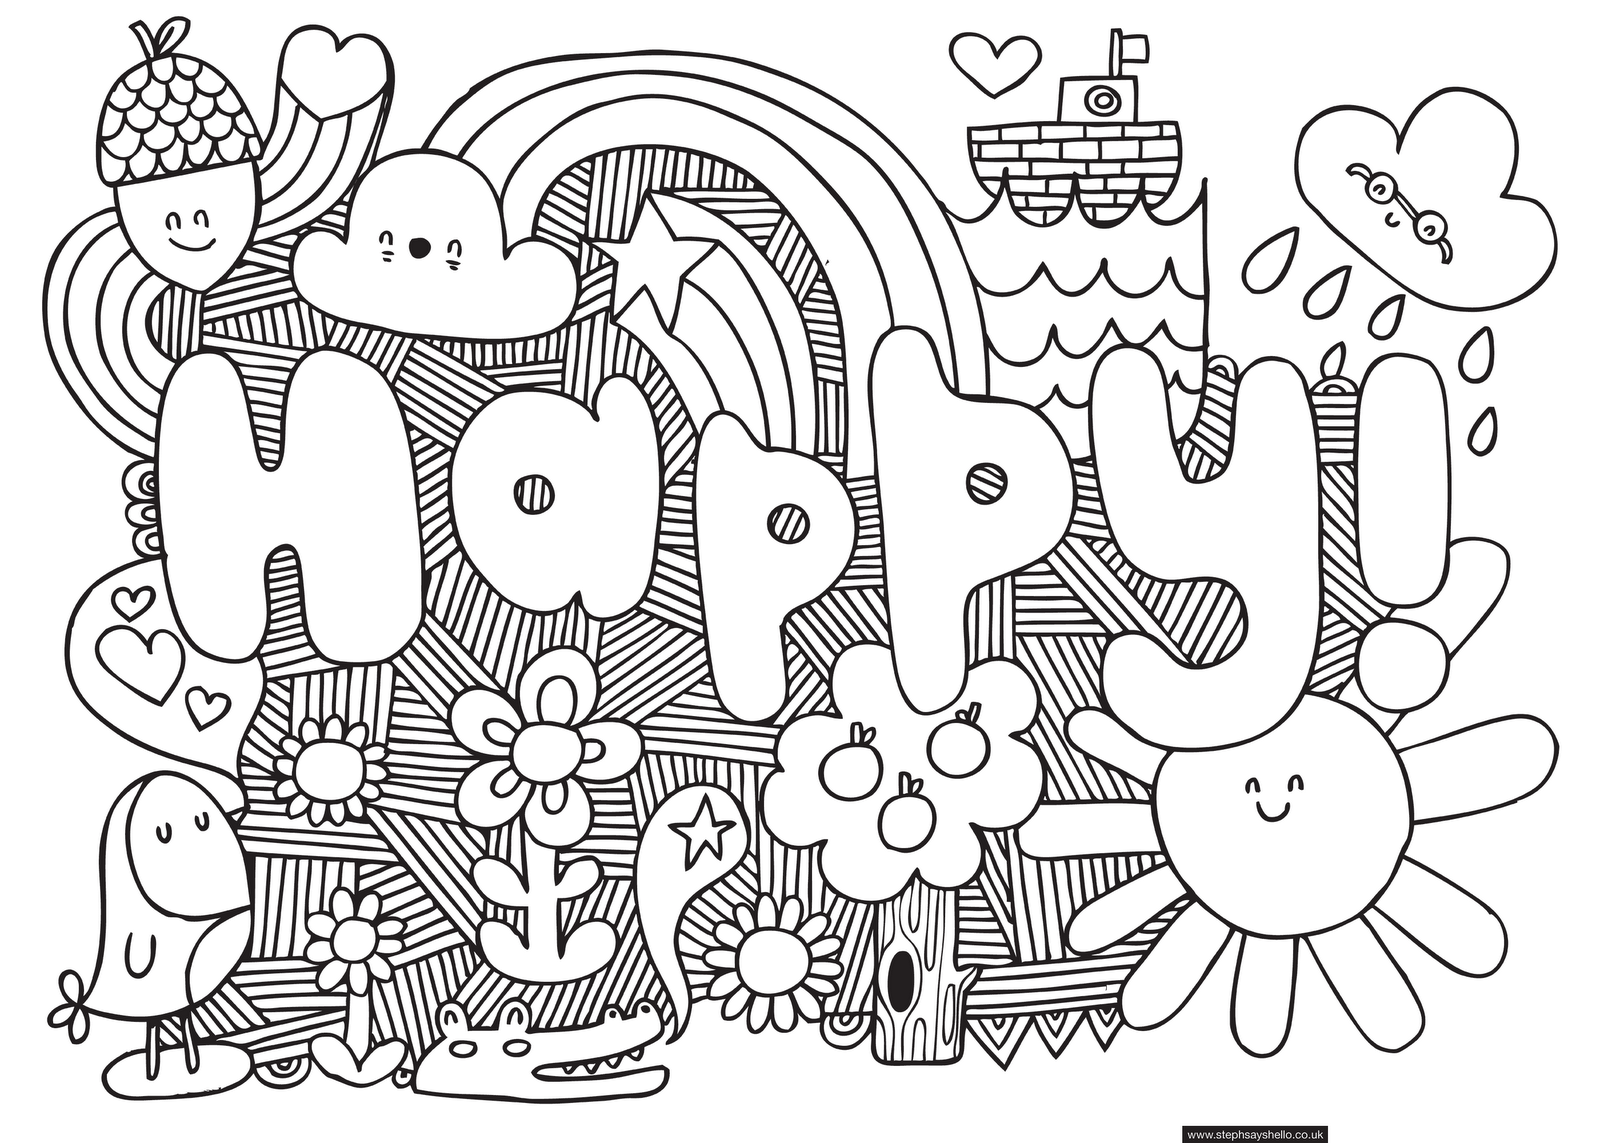 Cool For Older Kids - Coloring Pages for Kids and for Adults